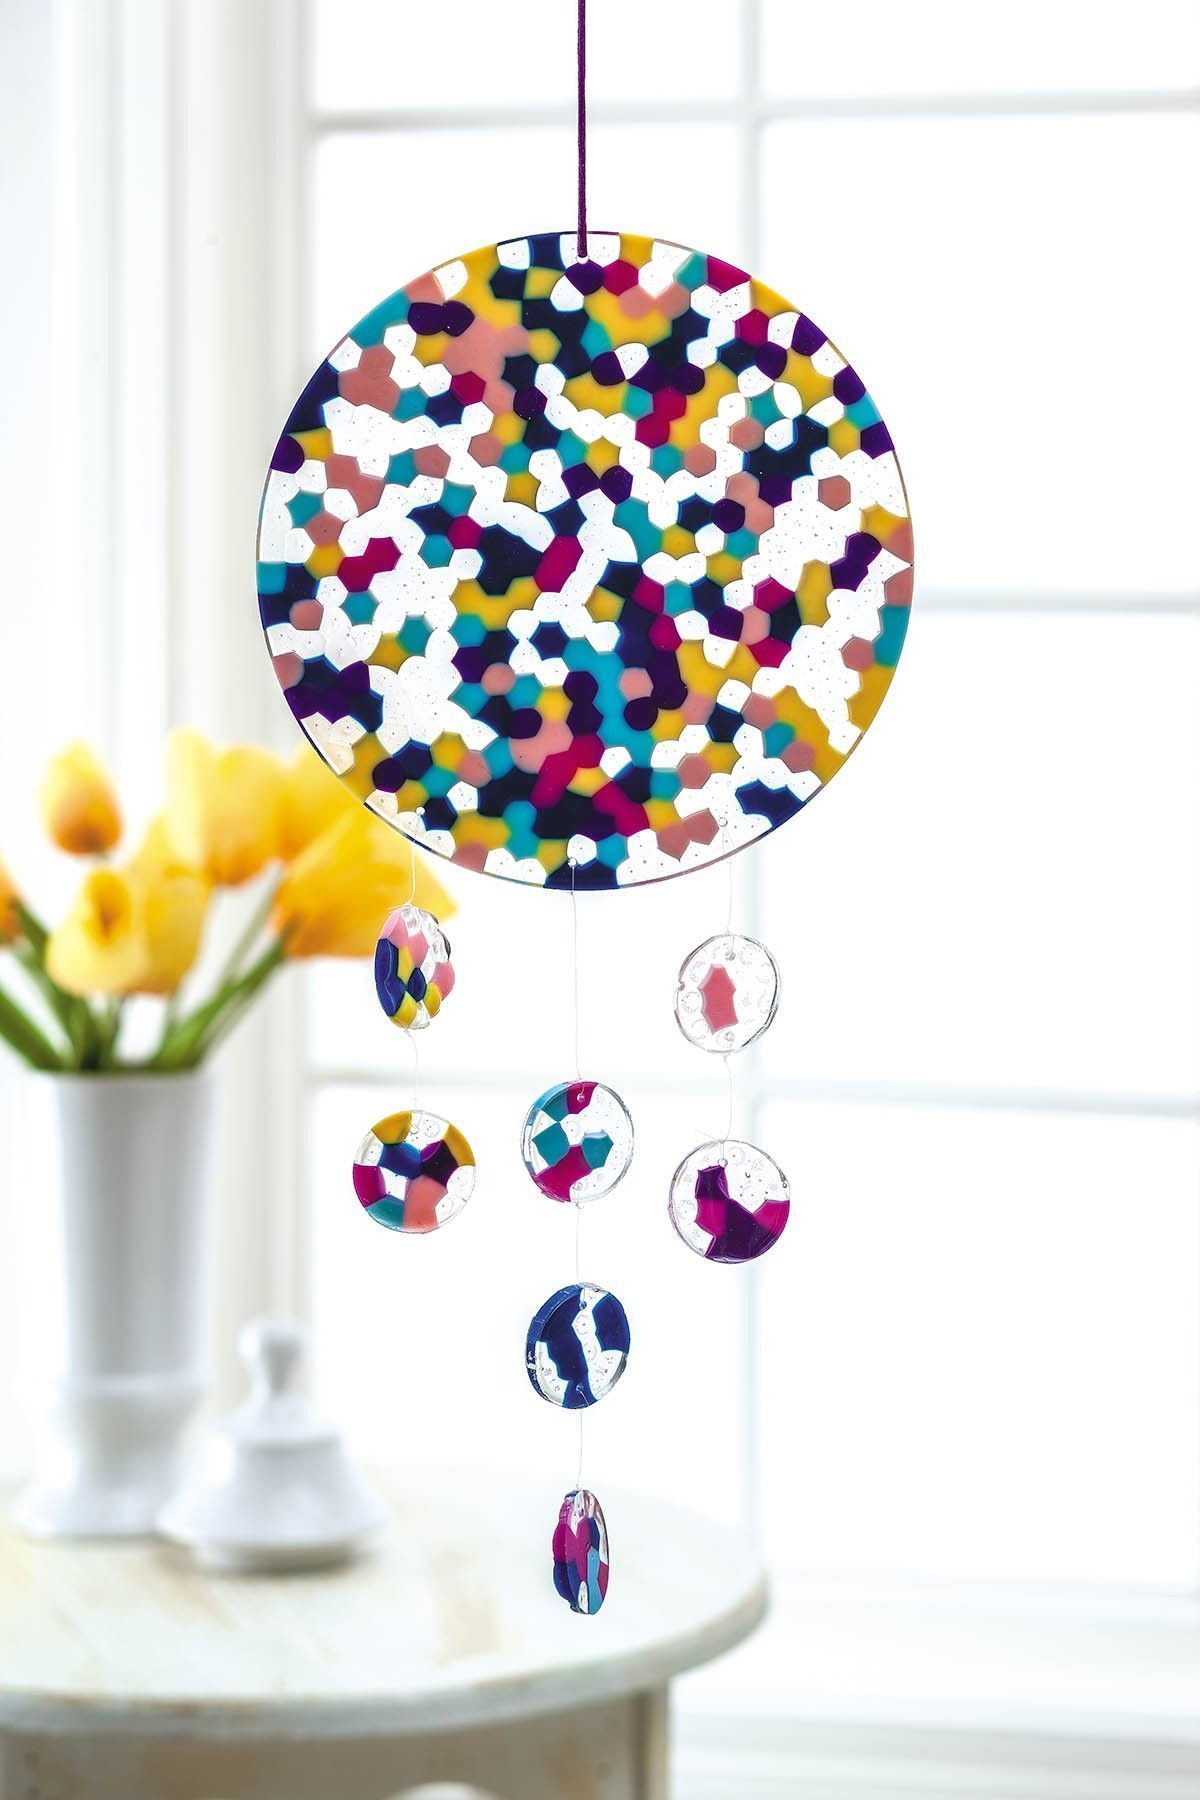 Melted Pony Bead Art -   diy To Do When Bored crafts